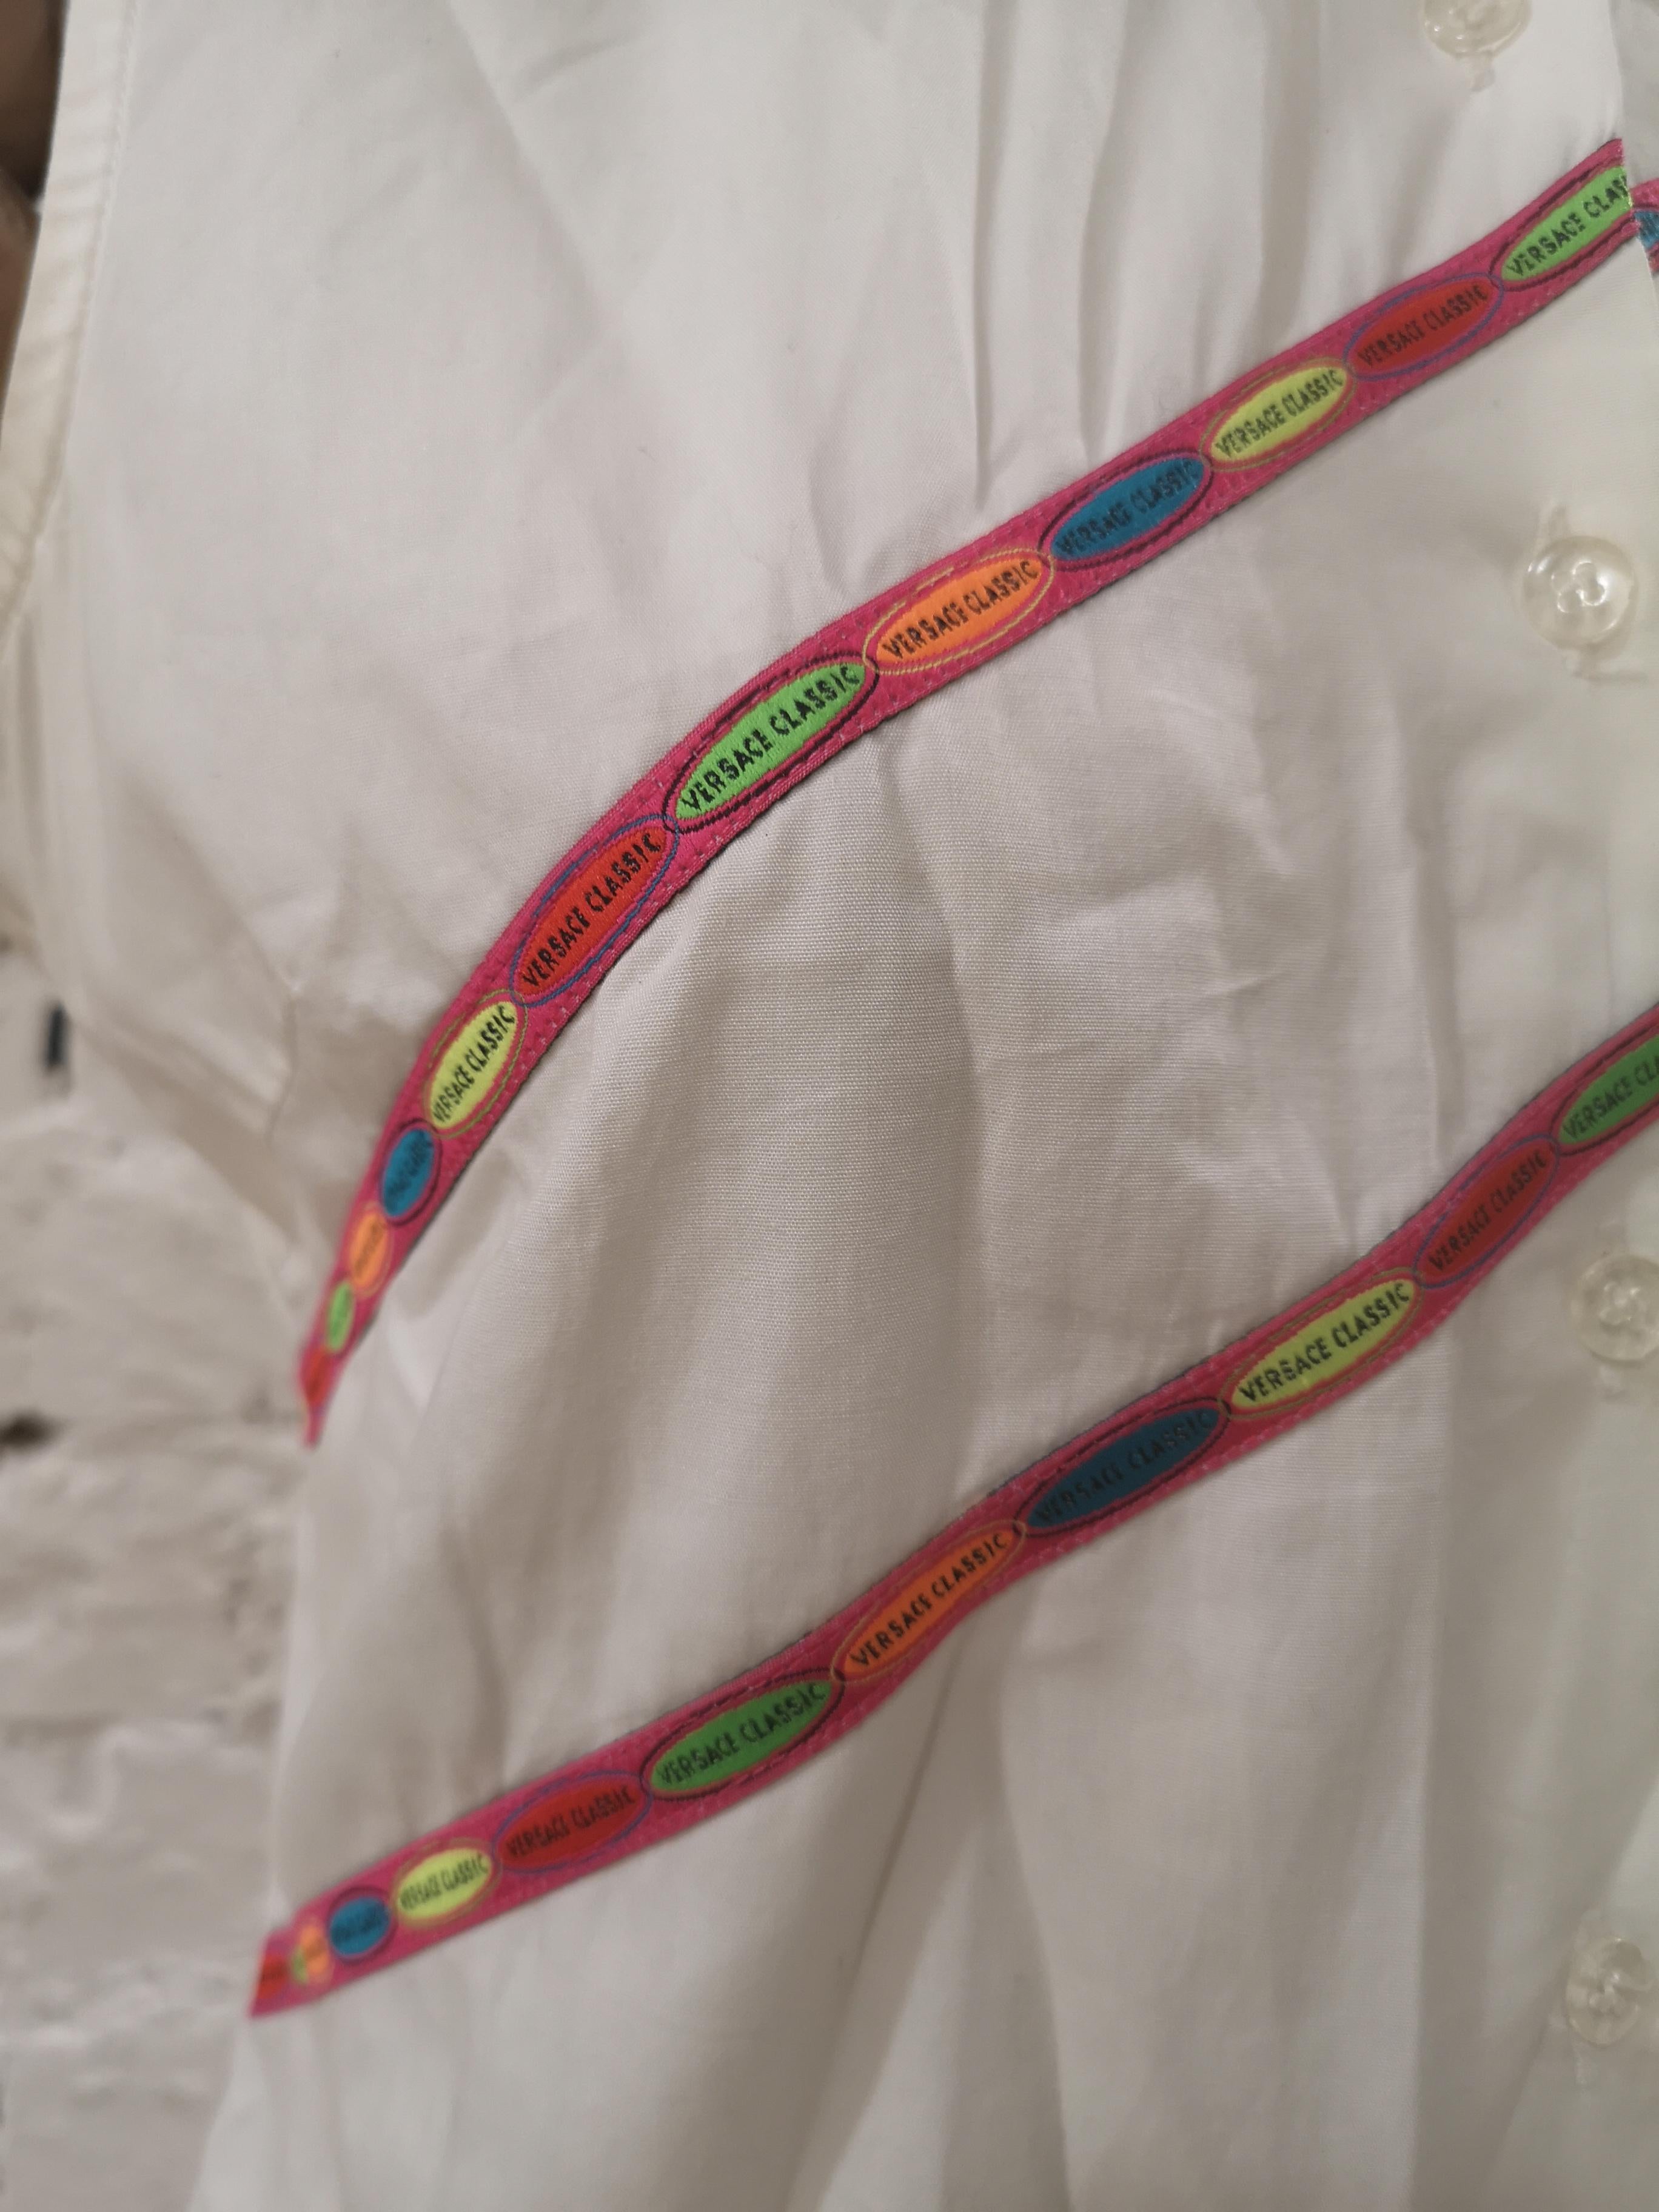 Versace Classic white shirt In Excellent Condition For Sale In Capri, IT